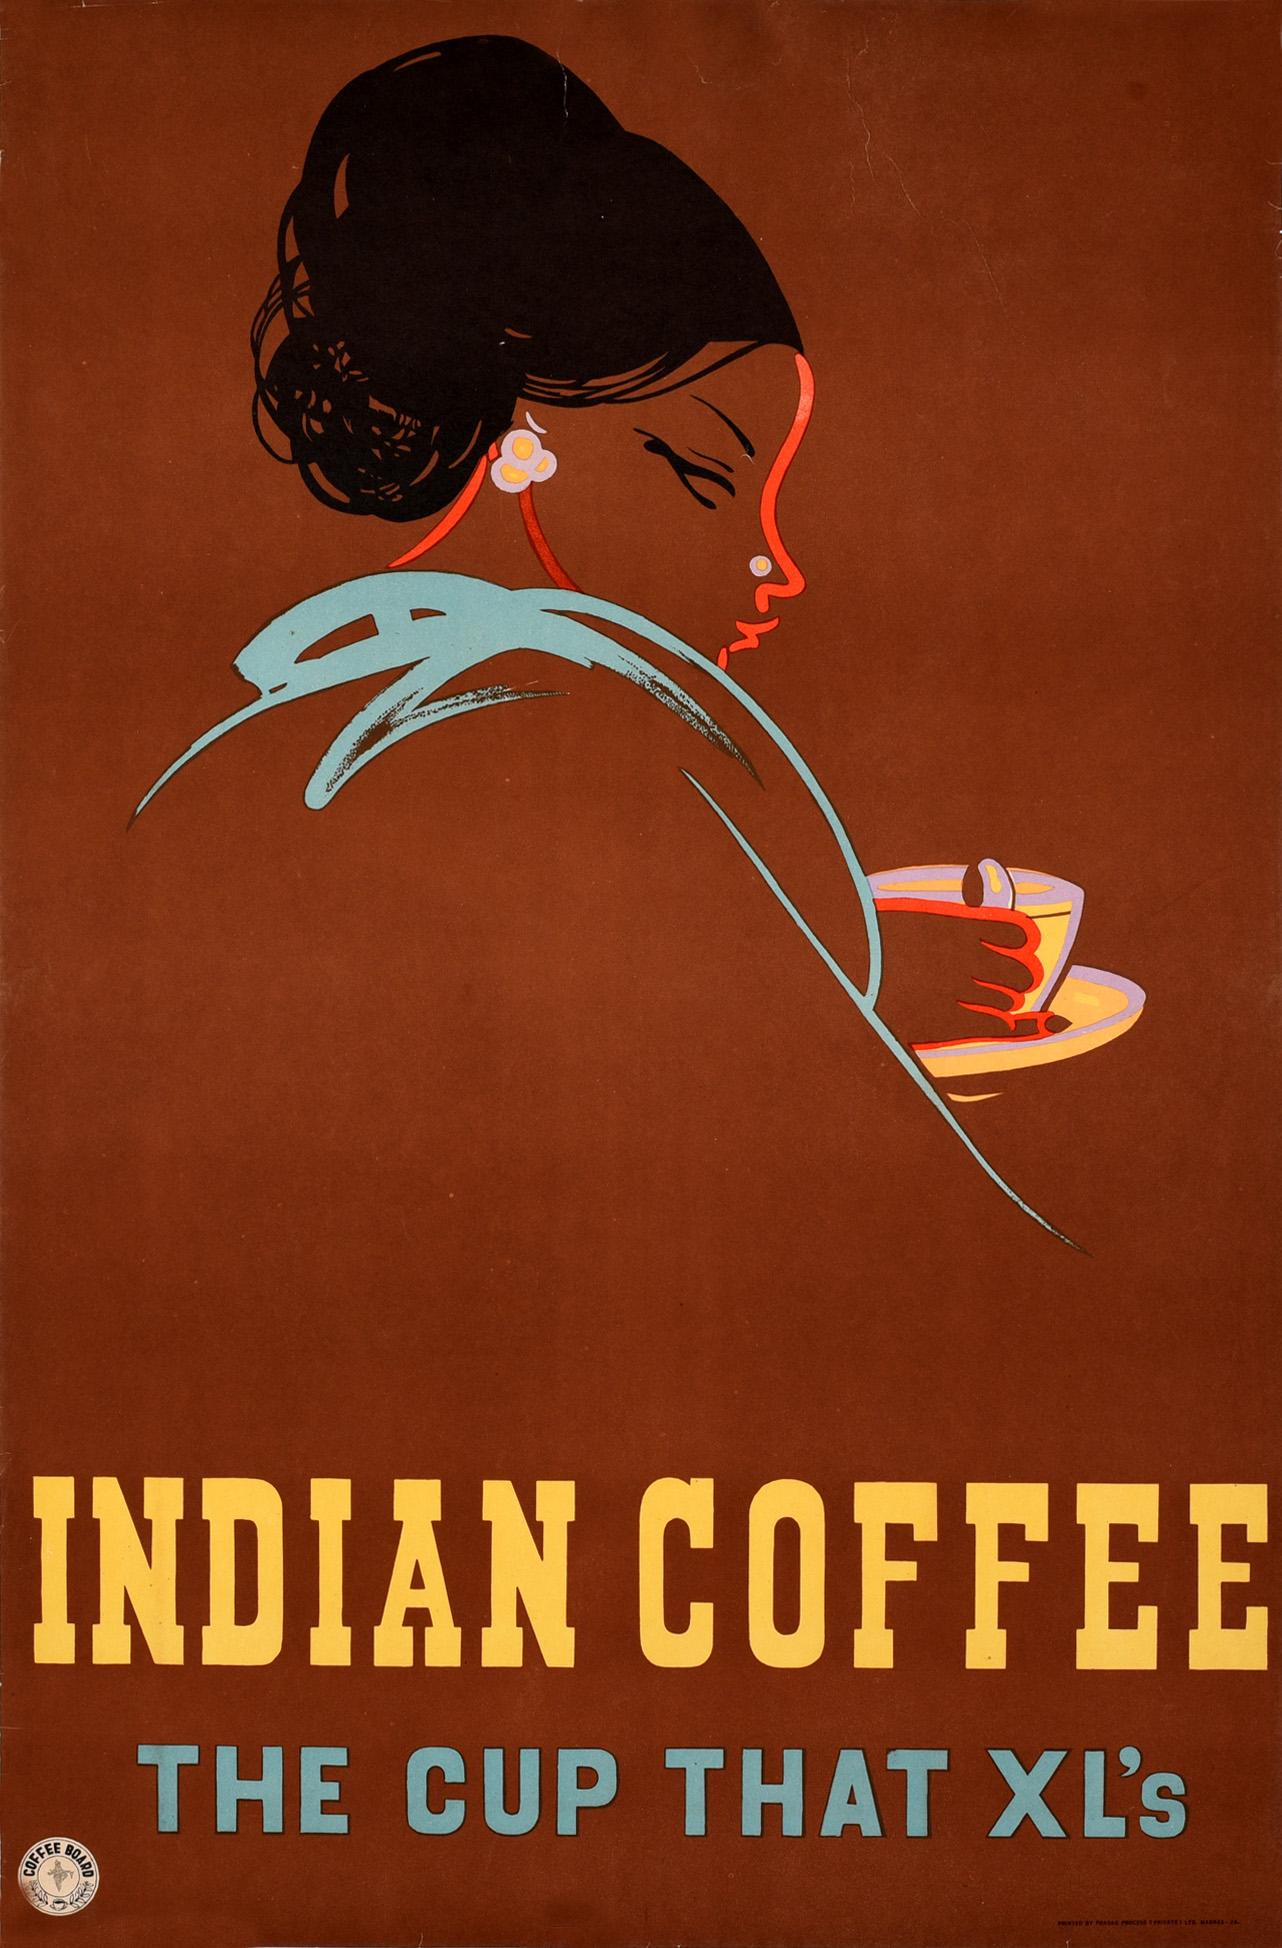 Original Vintage Poster Indian Coffee The Cup That XL's India Drink Coffee Board